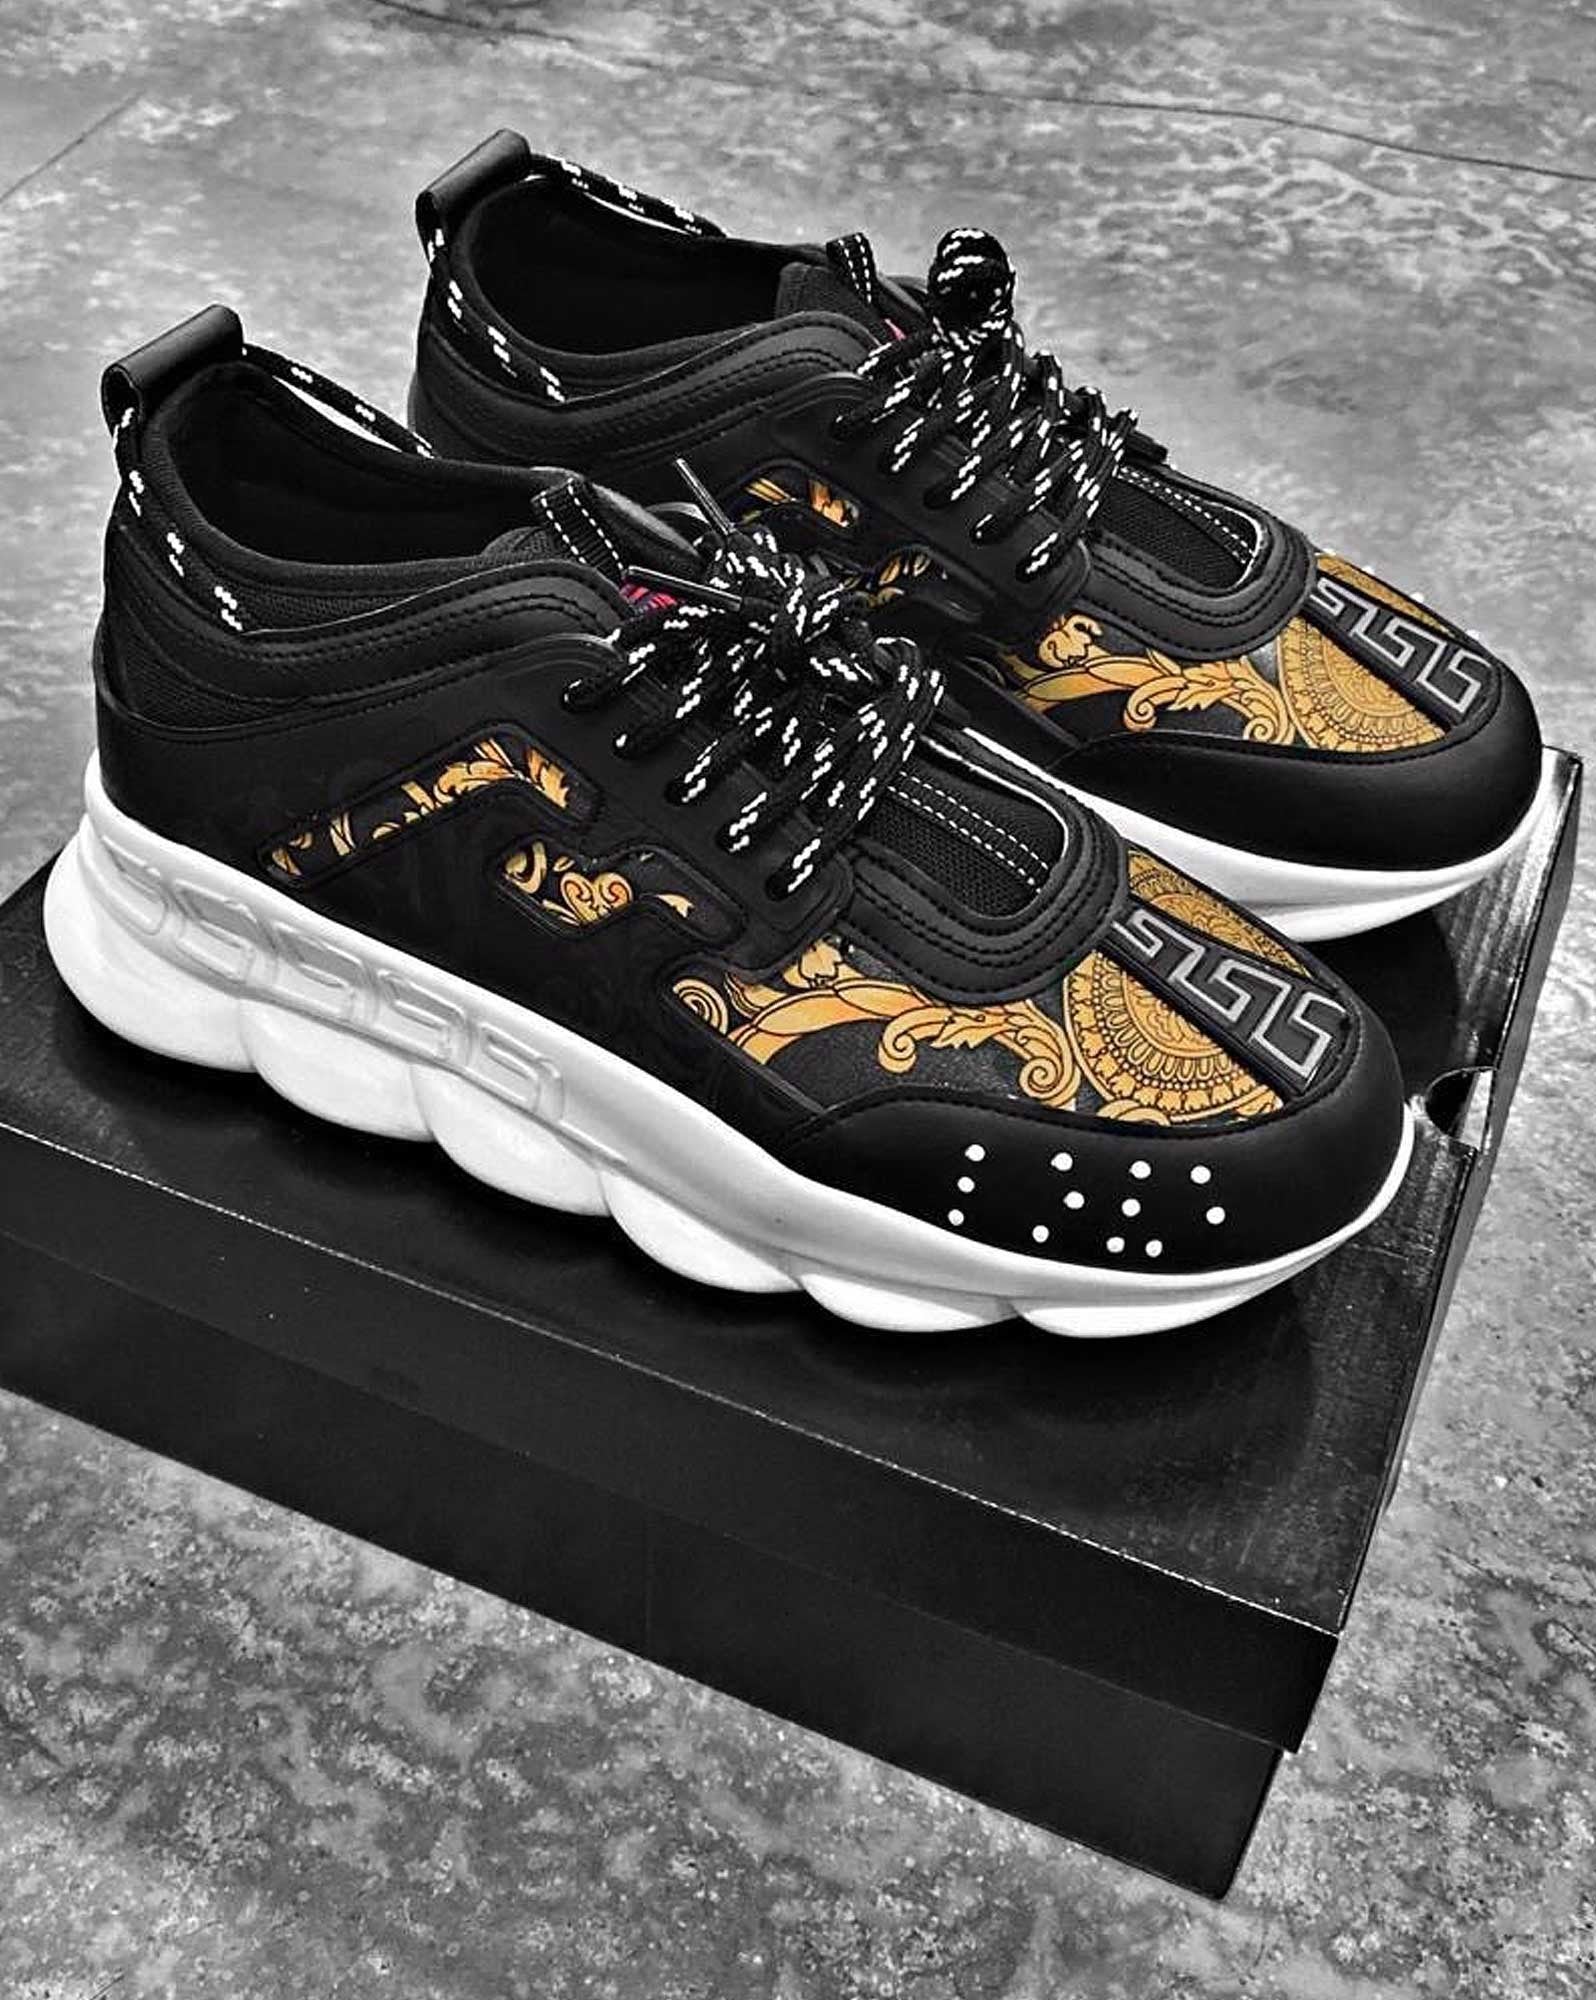 Trendy black sneakers with gold baroque patterns for men